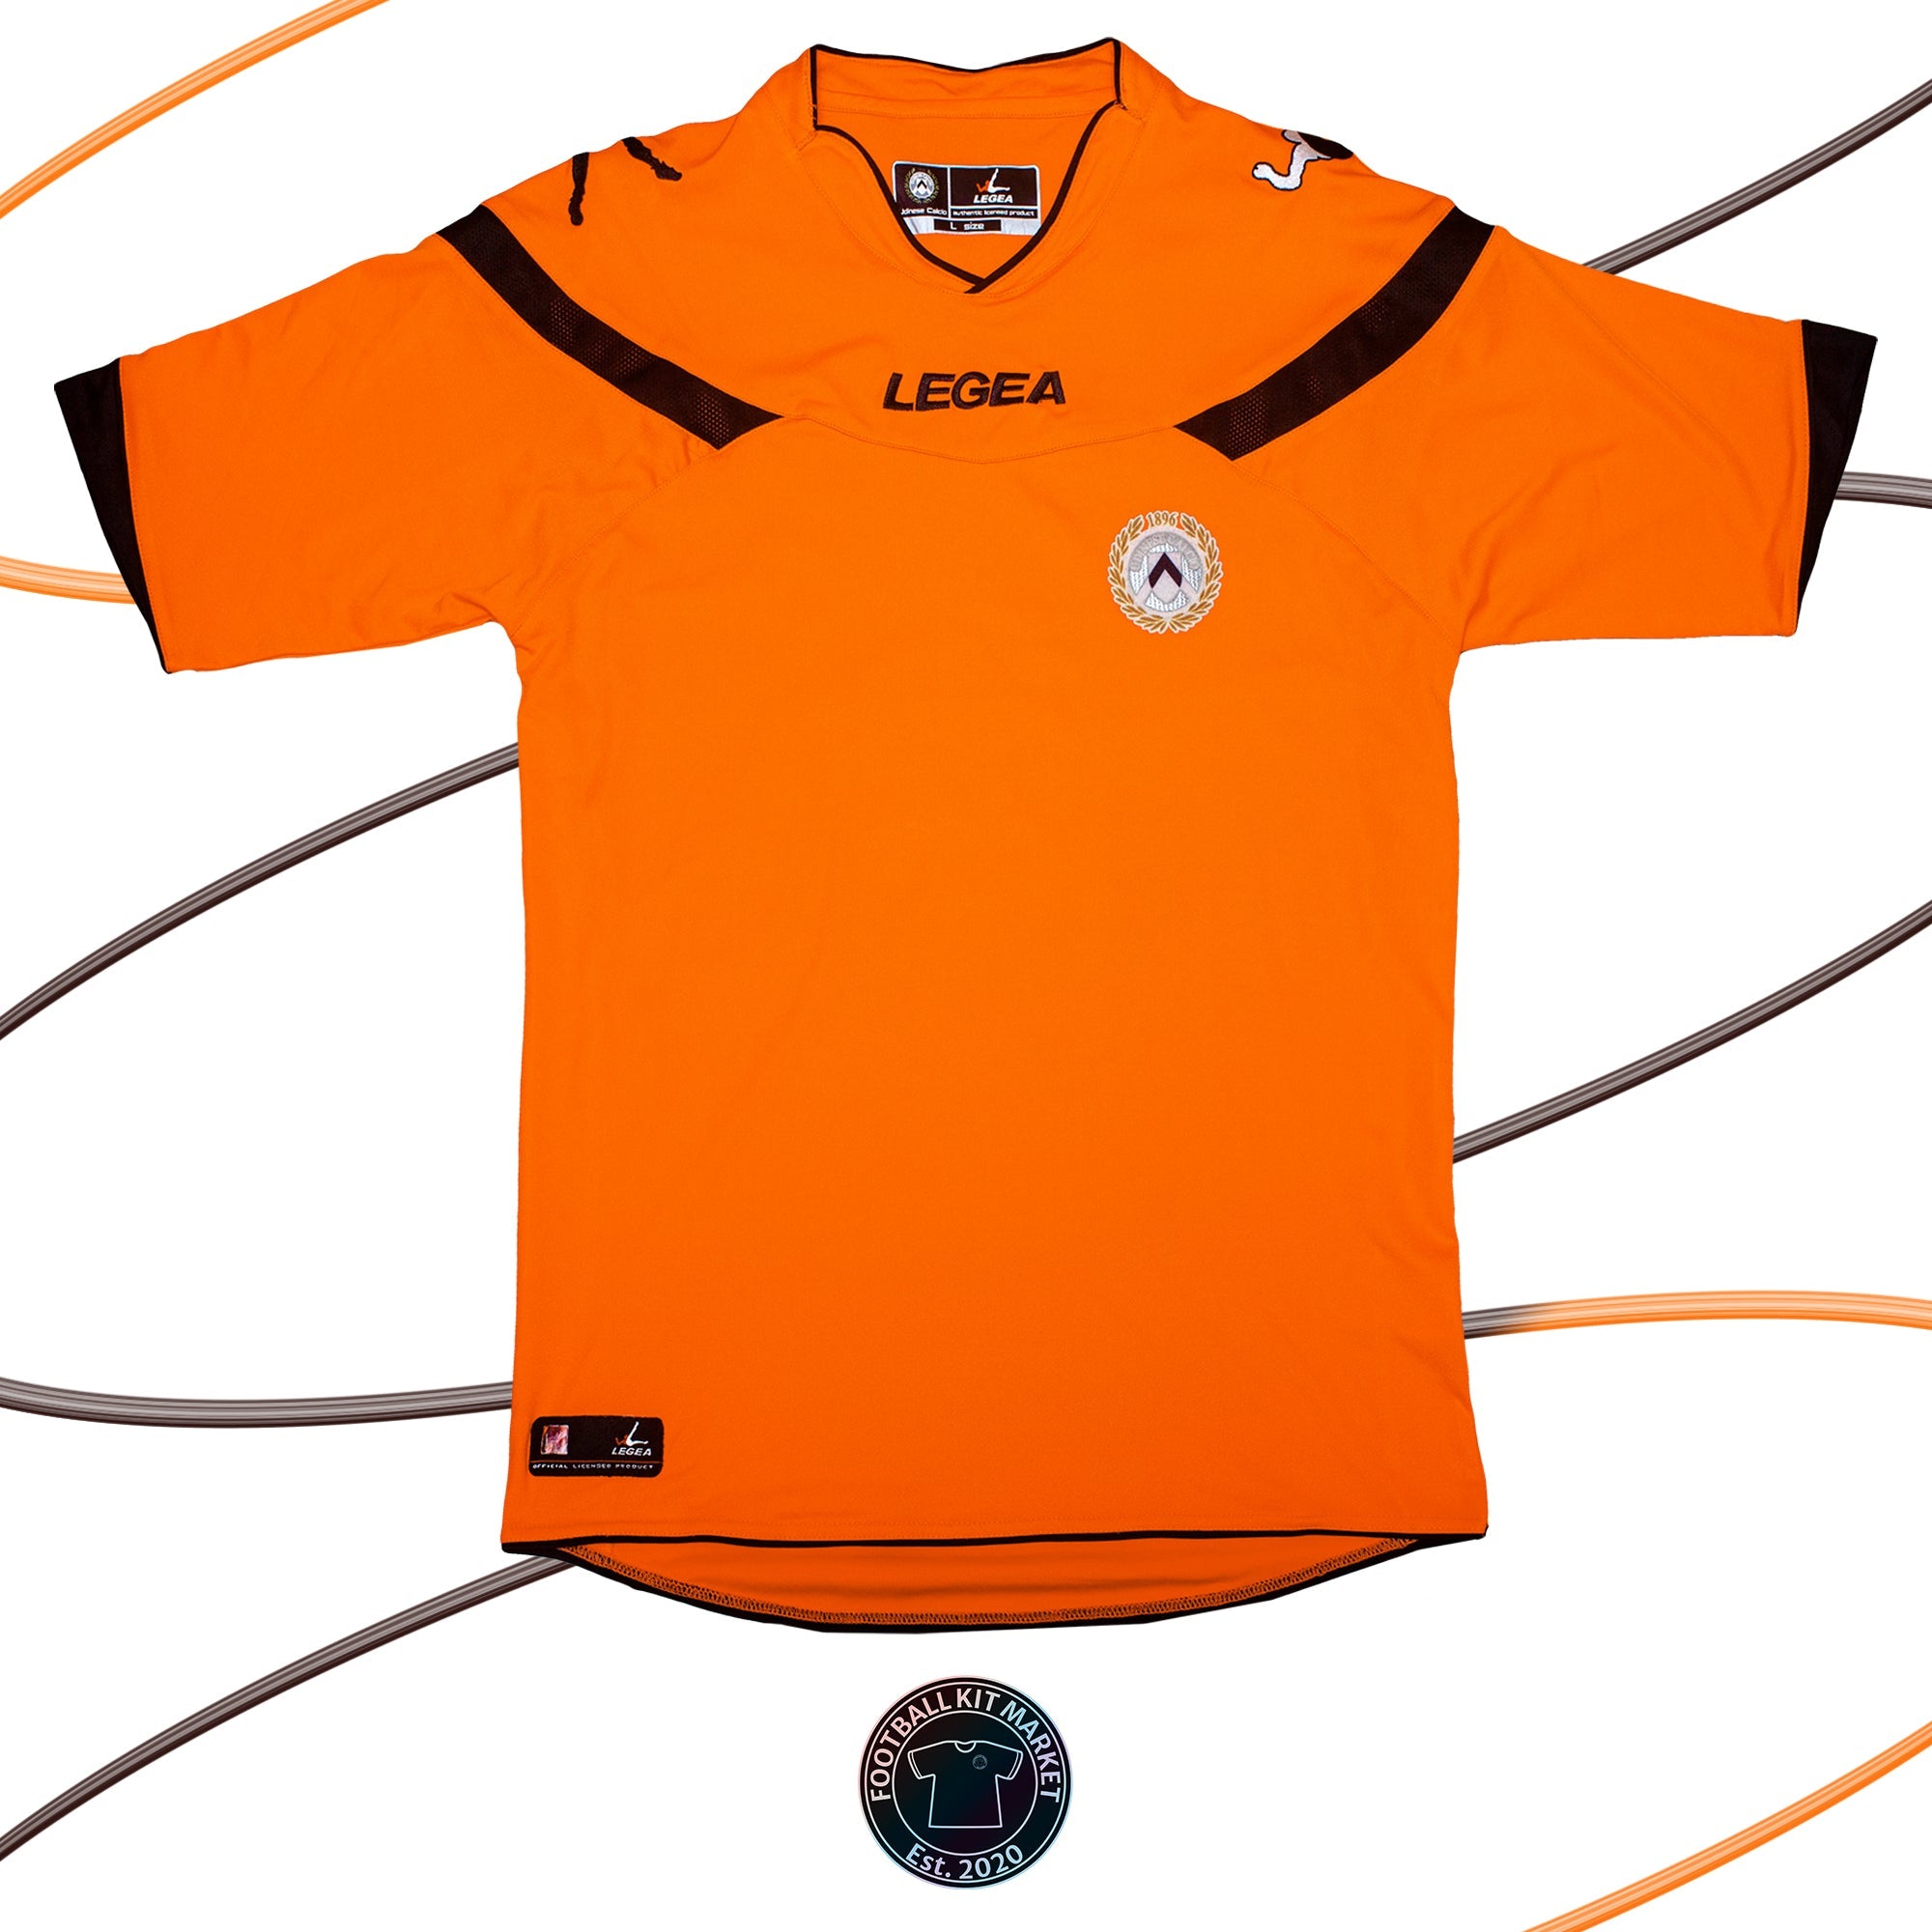 Genuine UDINESE Away Shirt (2011-2012) - LEGEA (L) - Product Image from Football Kit Market